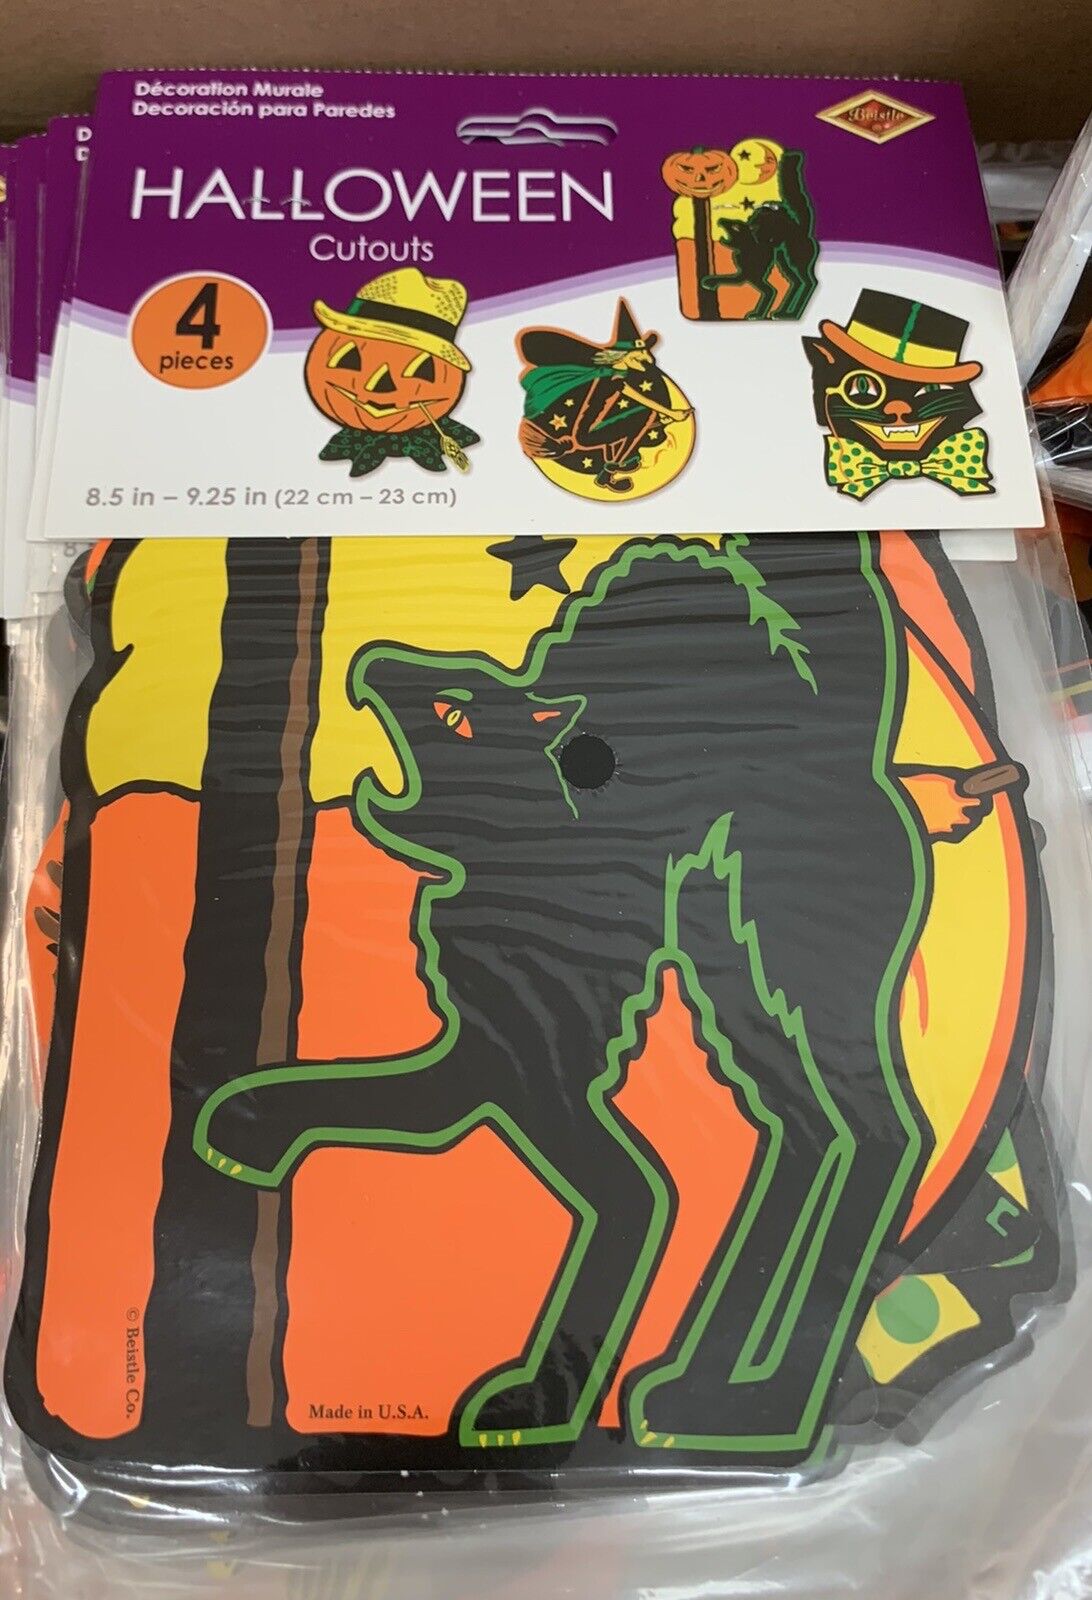 8 Vintage RETRO Styled BEISTLE Repro HALLOWEEN DECORATIONS Die-cut Cutouts